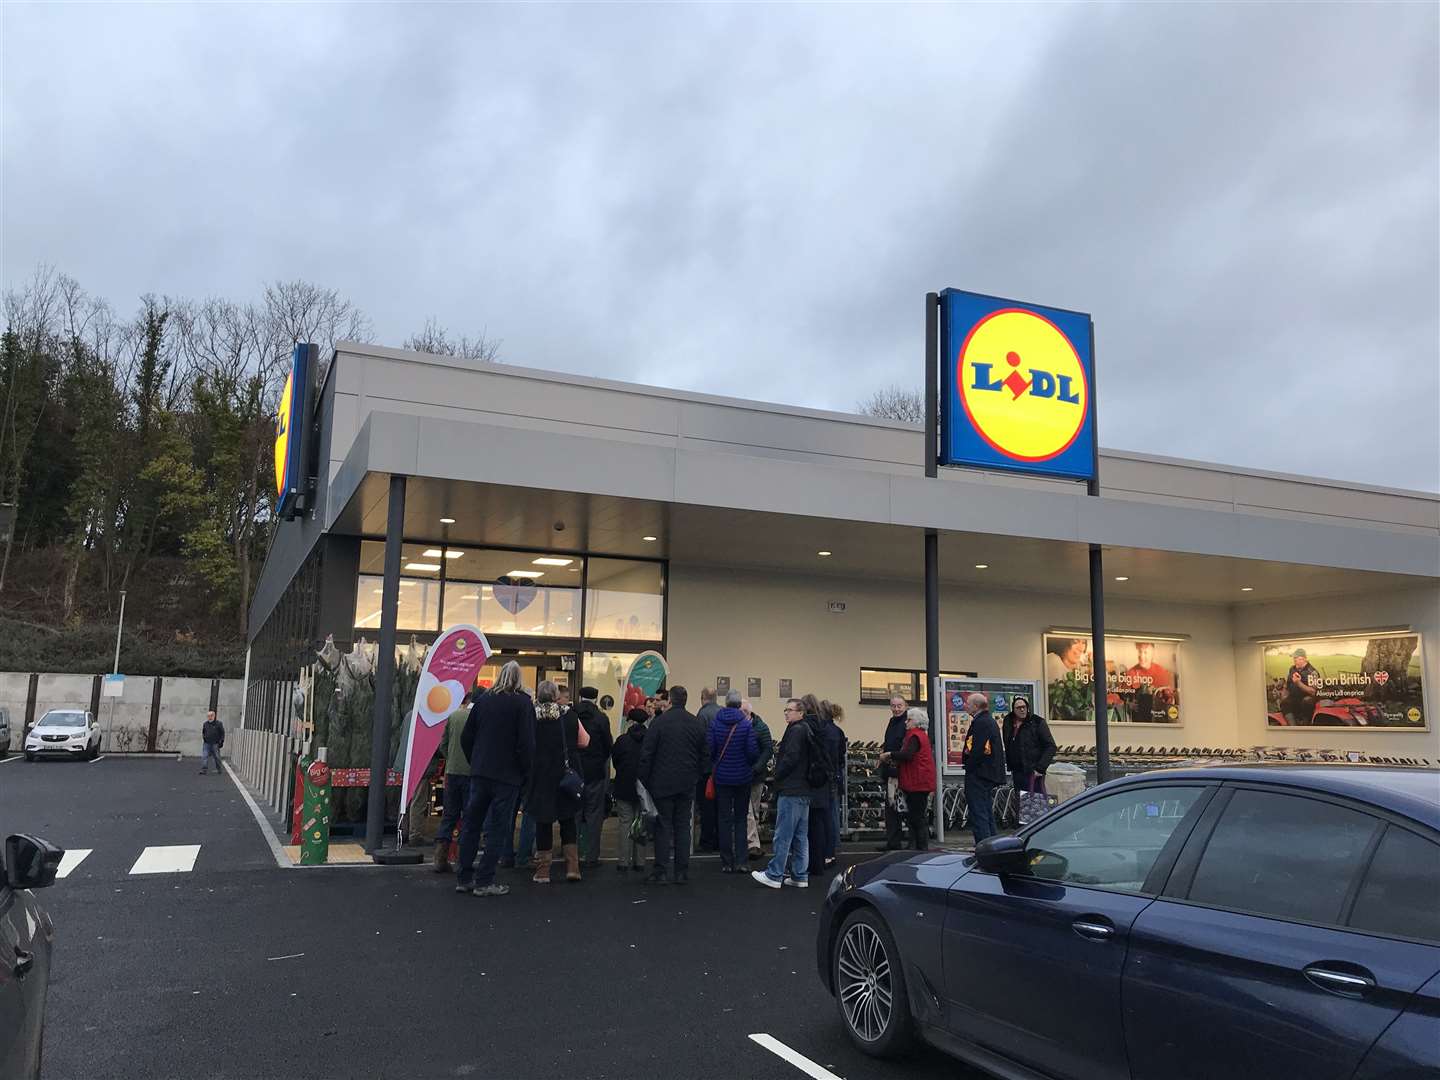 Customers queue outside the new Lidl (22755131)